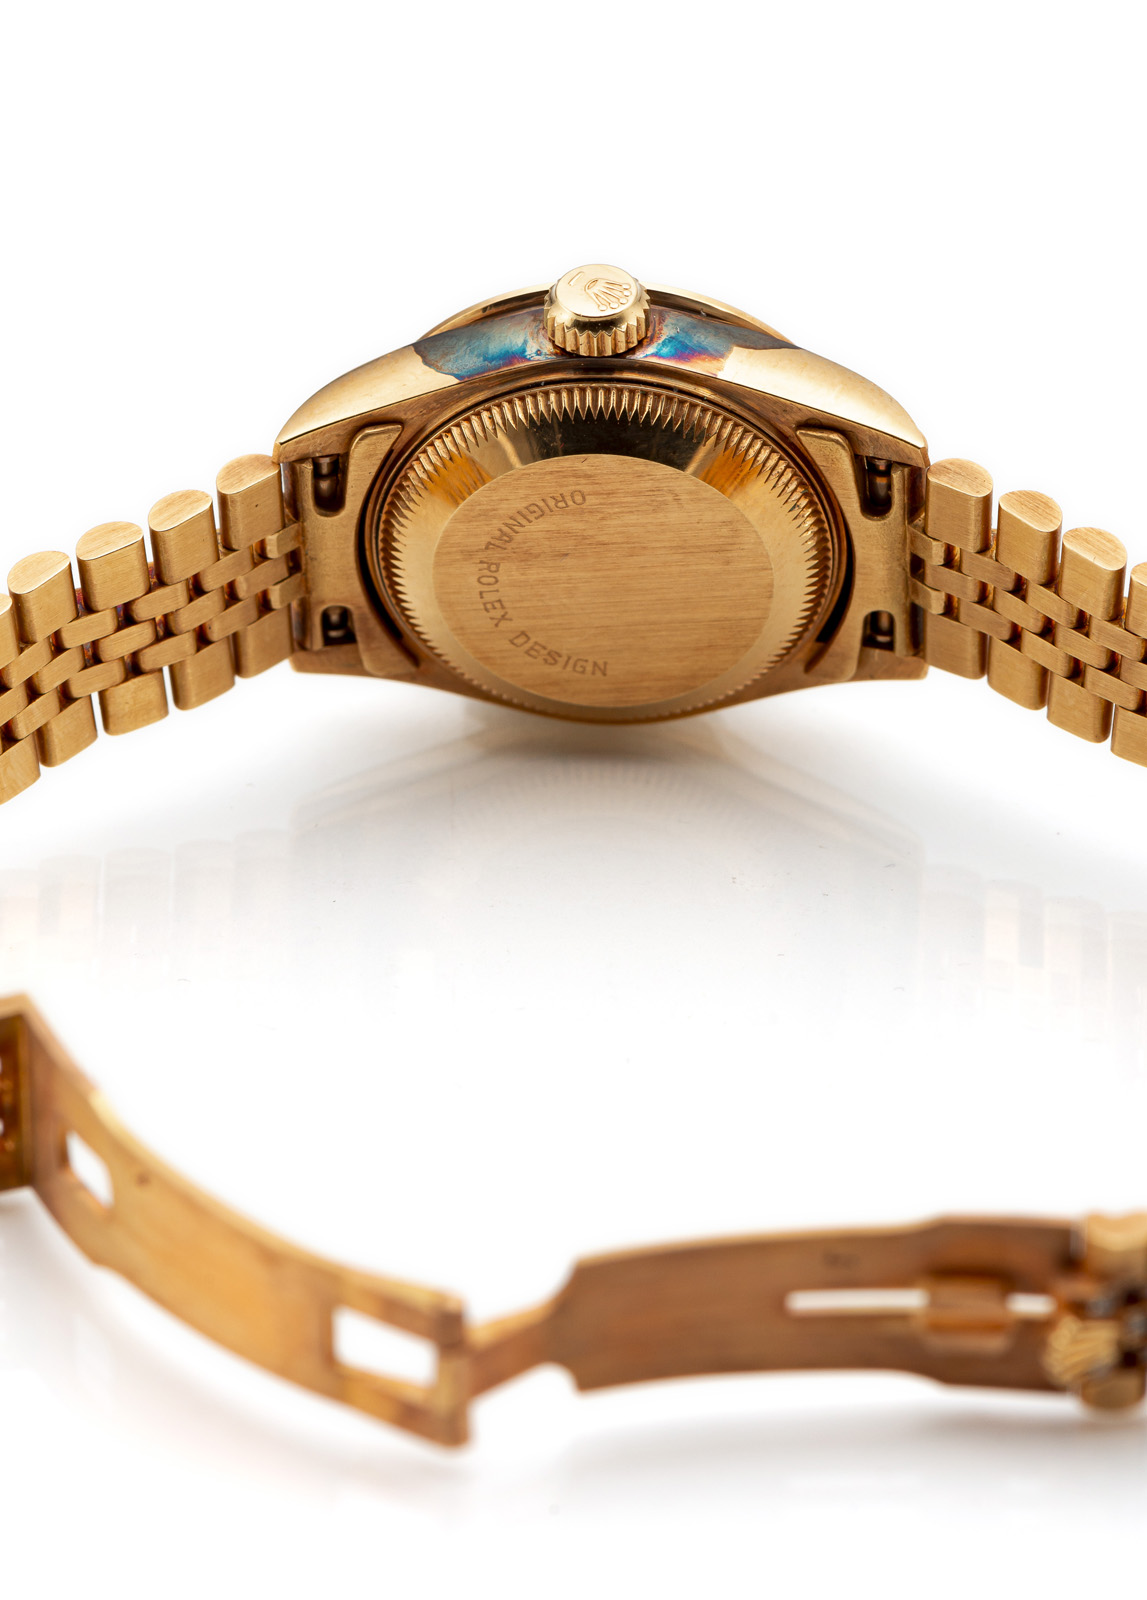 A ROLEX LADY'S WATCH - Image 4 of 5